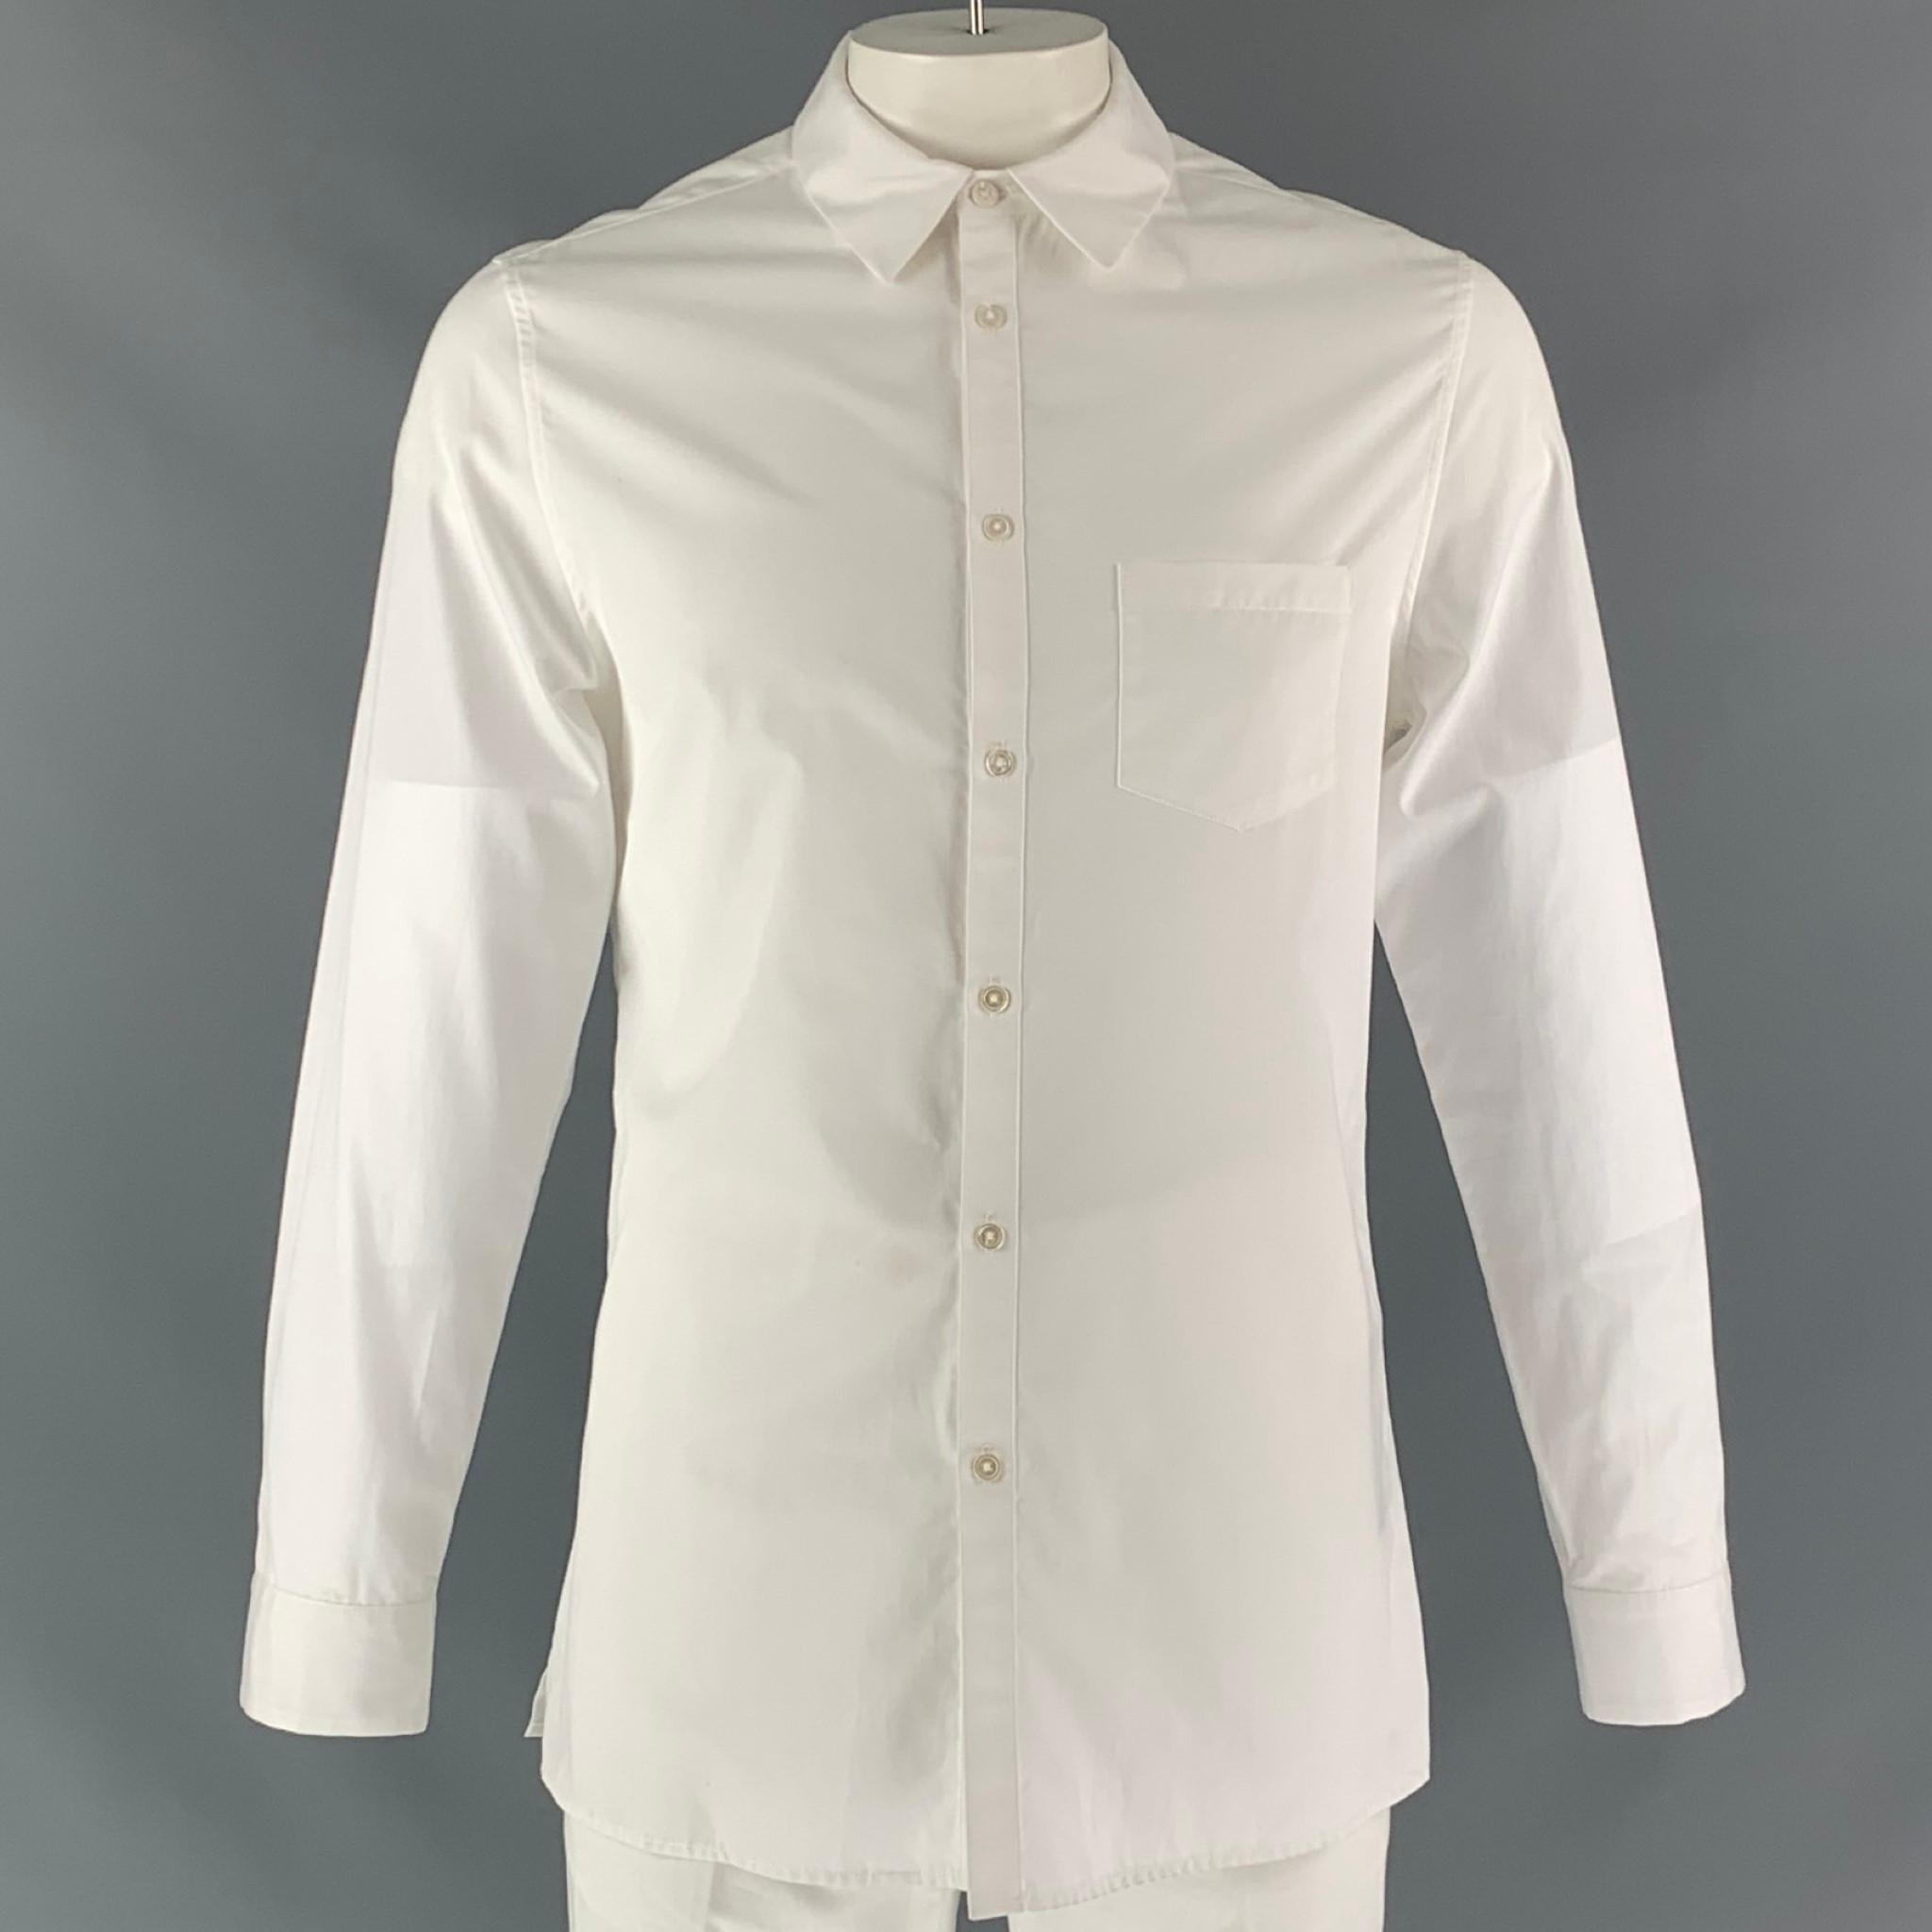 ADAM LIPPES long sleeve dress shirt comes in white cotton fabric, button up closure, spread collar and one button square sleeve cuff.

New with Tags.
Marked: L

Measurements:

Shoulder: 18 in
Chest: 44 in
Sleeve: 26 in
Length: 31 in 

 